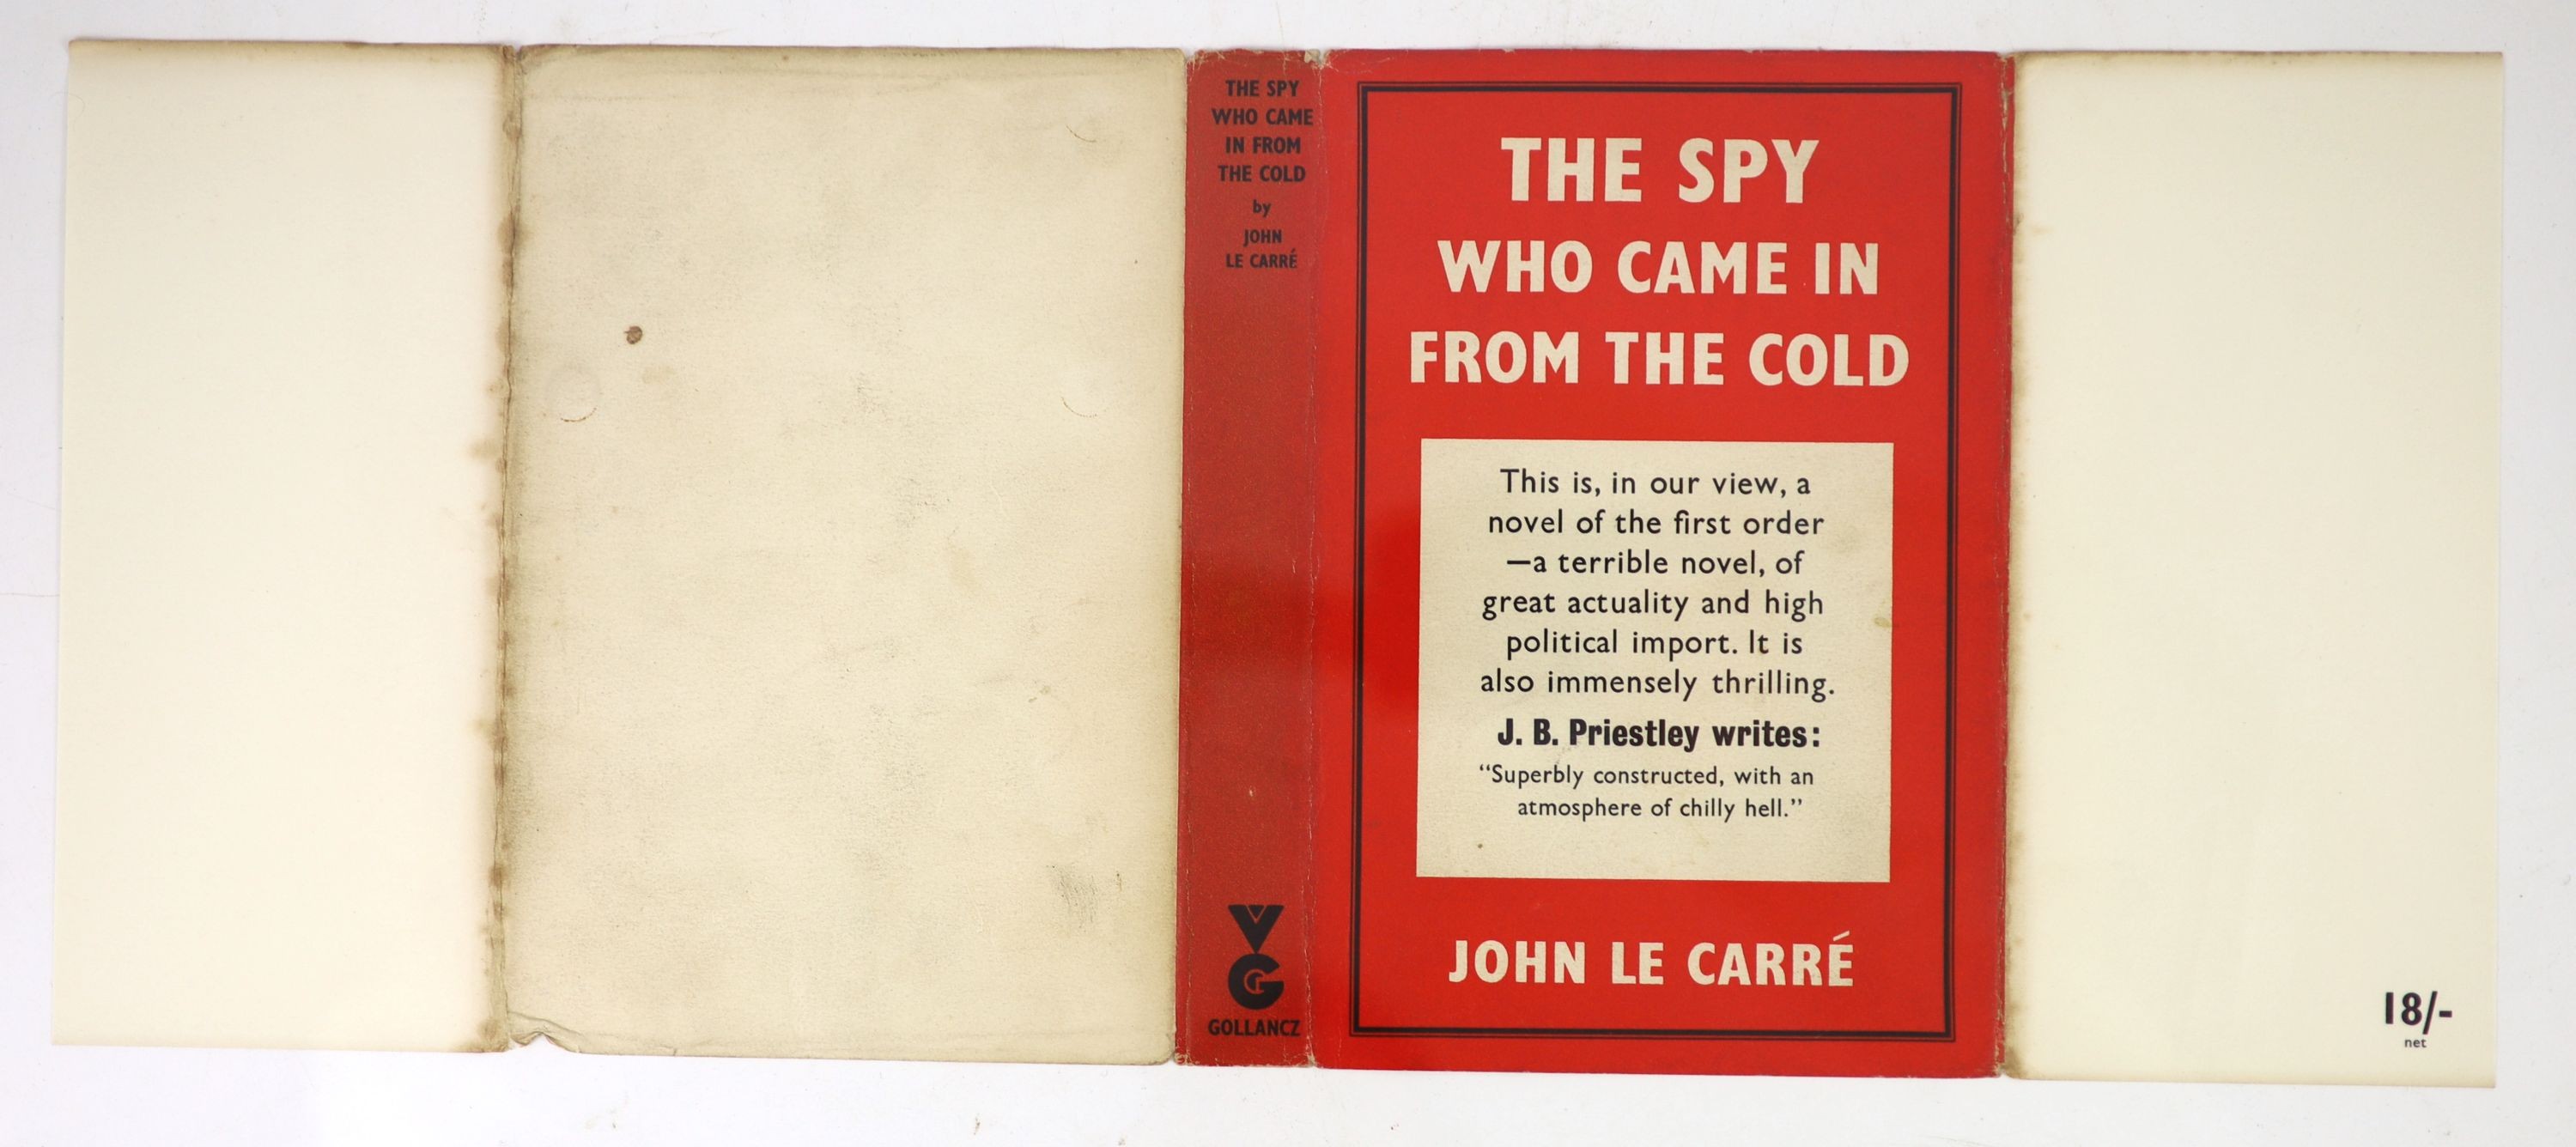 Le Carre, John - The Spy Who Came in From the Cold, 1st edition, with d/j, London, 1963